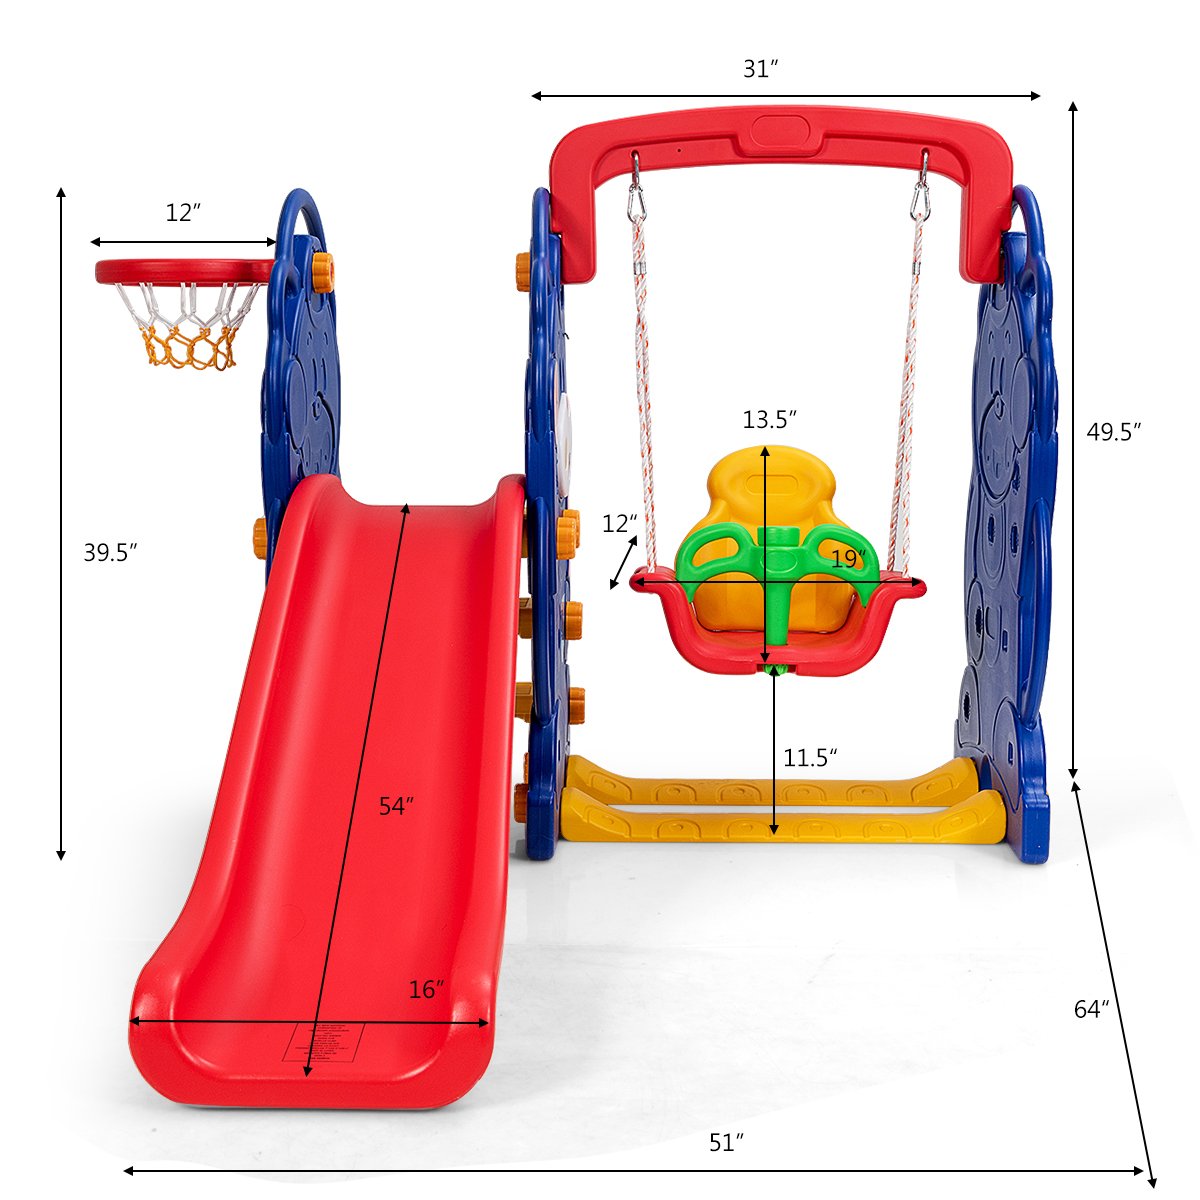 3-in-1 Toddler Climber and Swing Playset, Multicolor - Gallery Canada